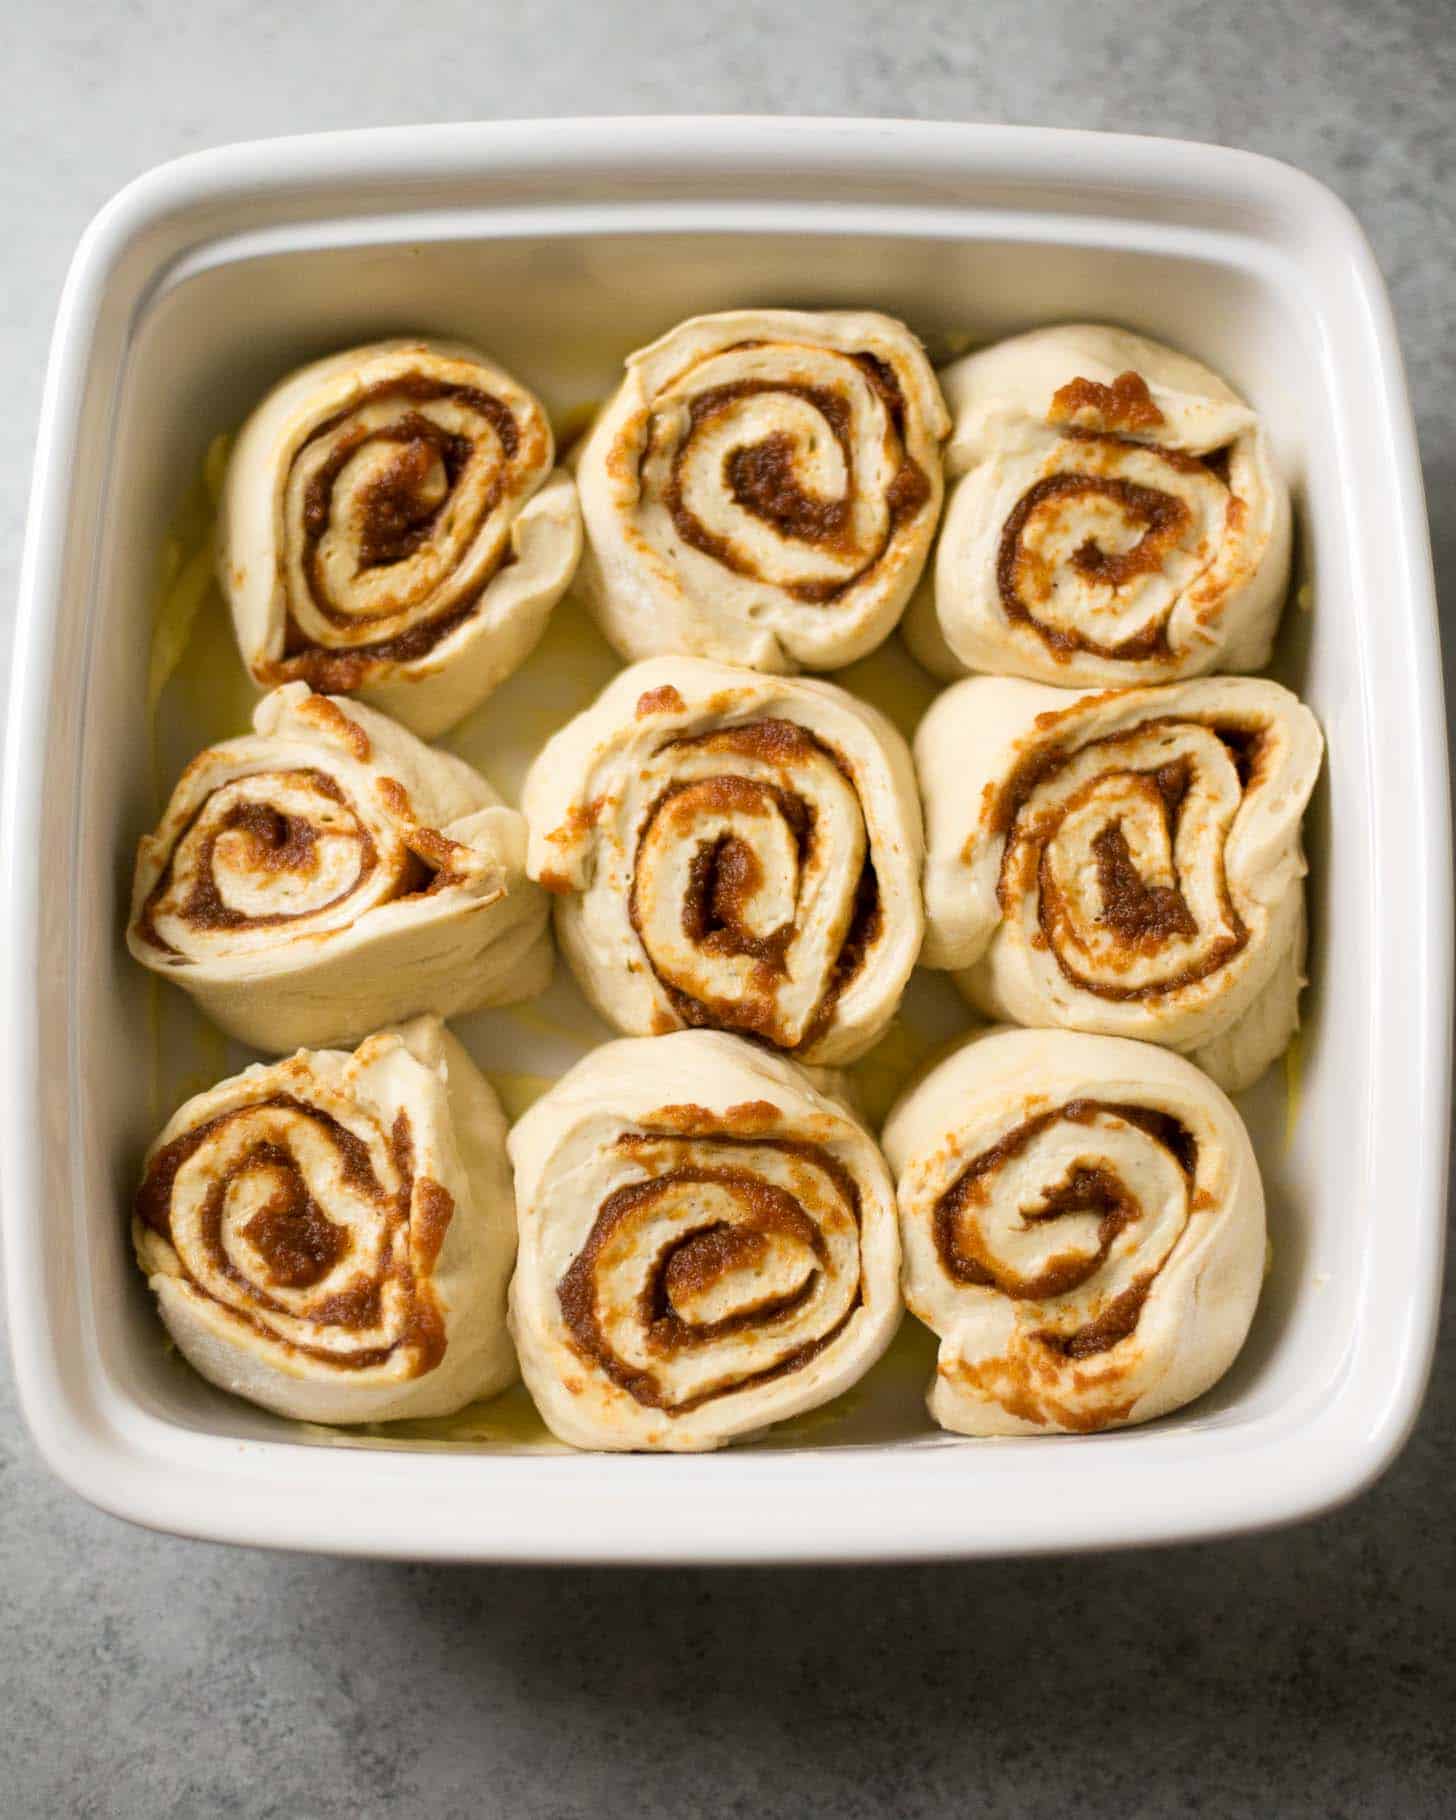 uncooked cinnamon rolls in a white baking dish